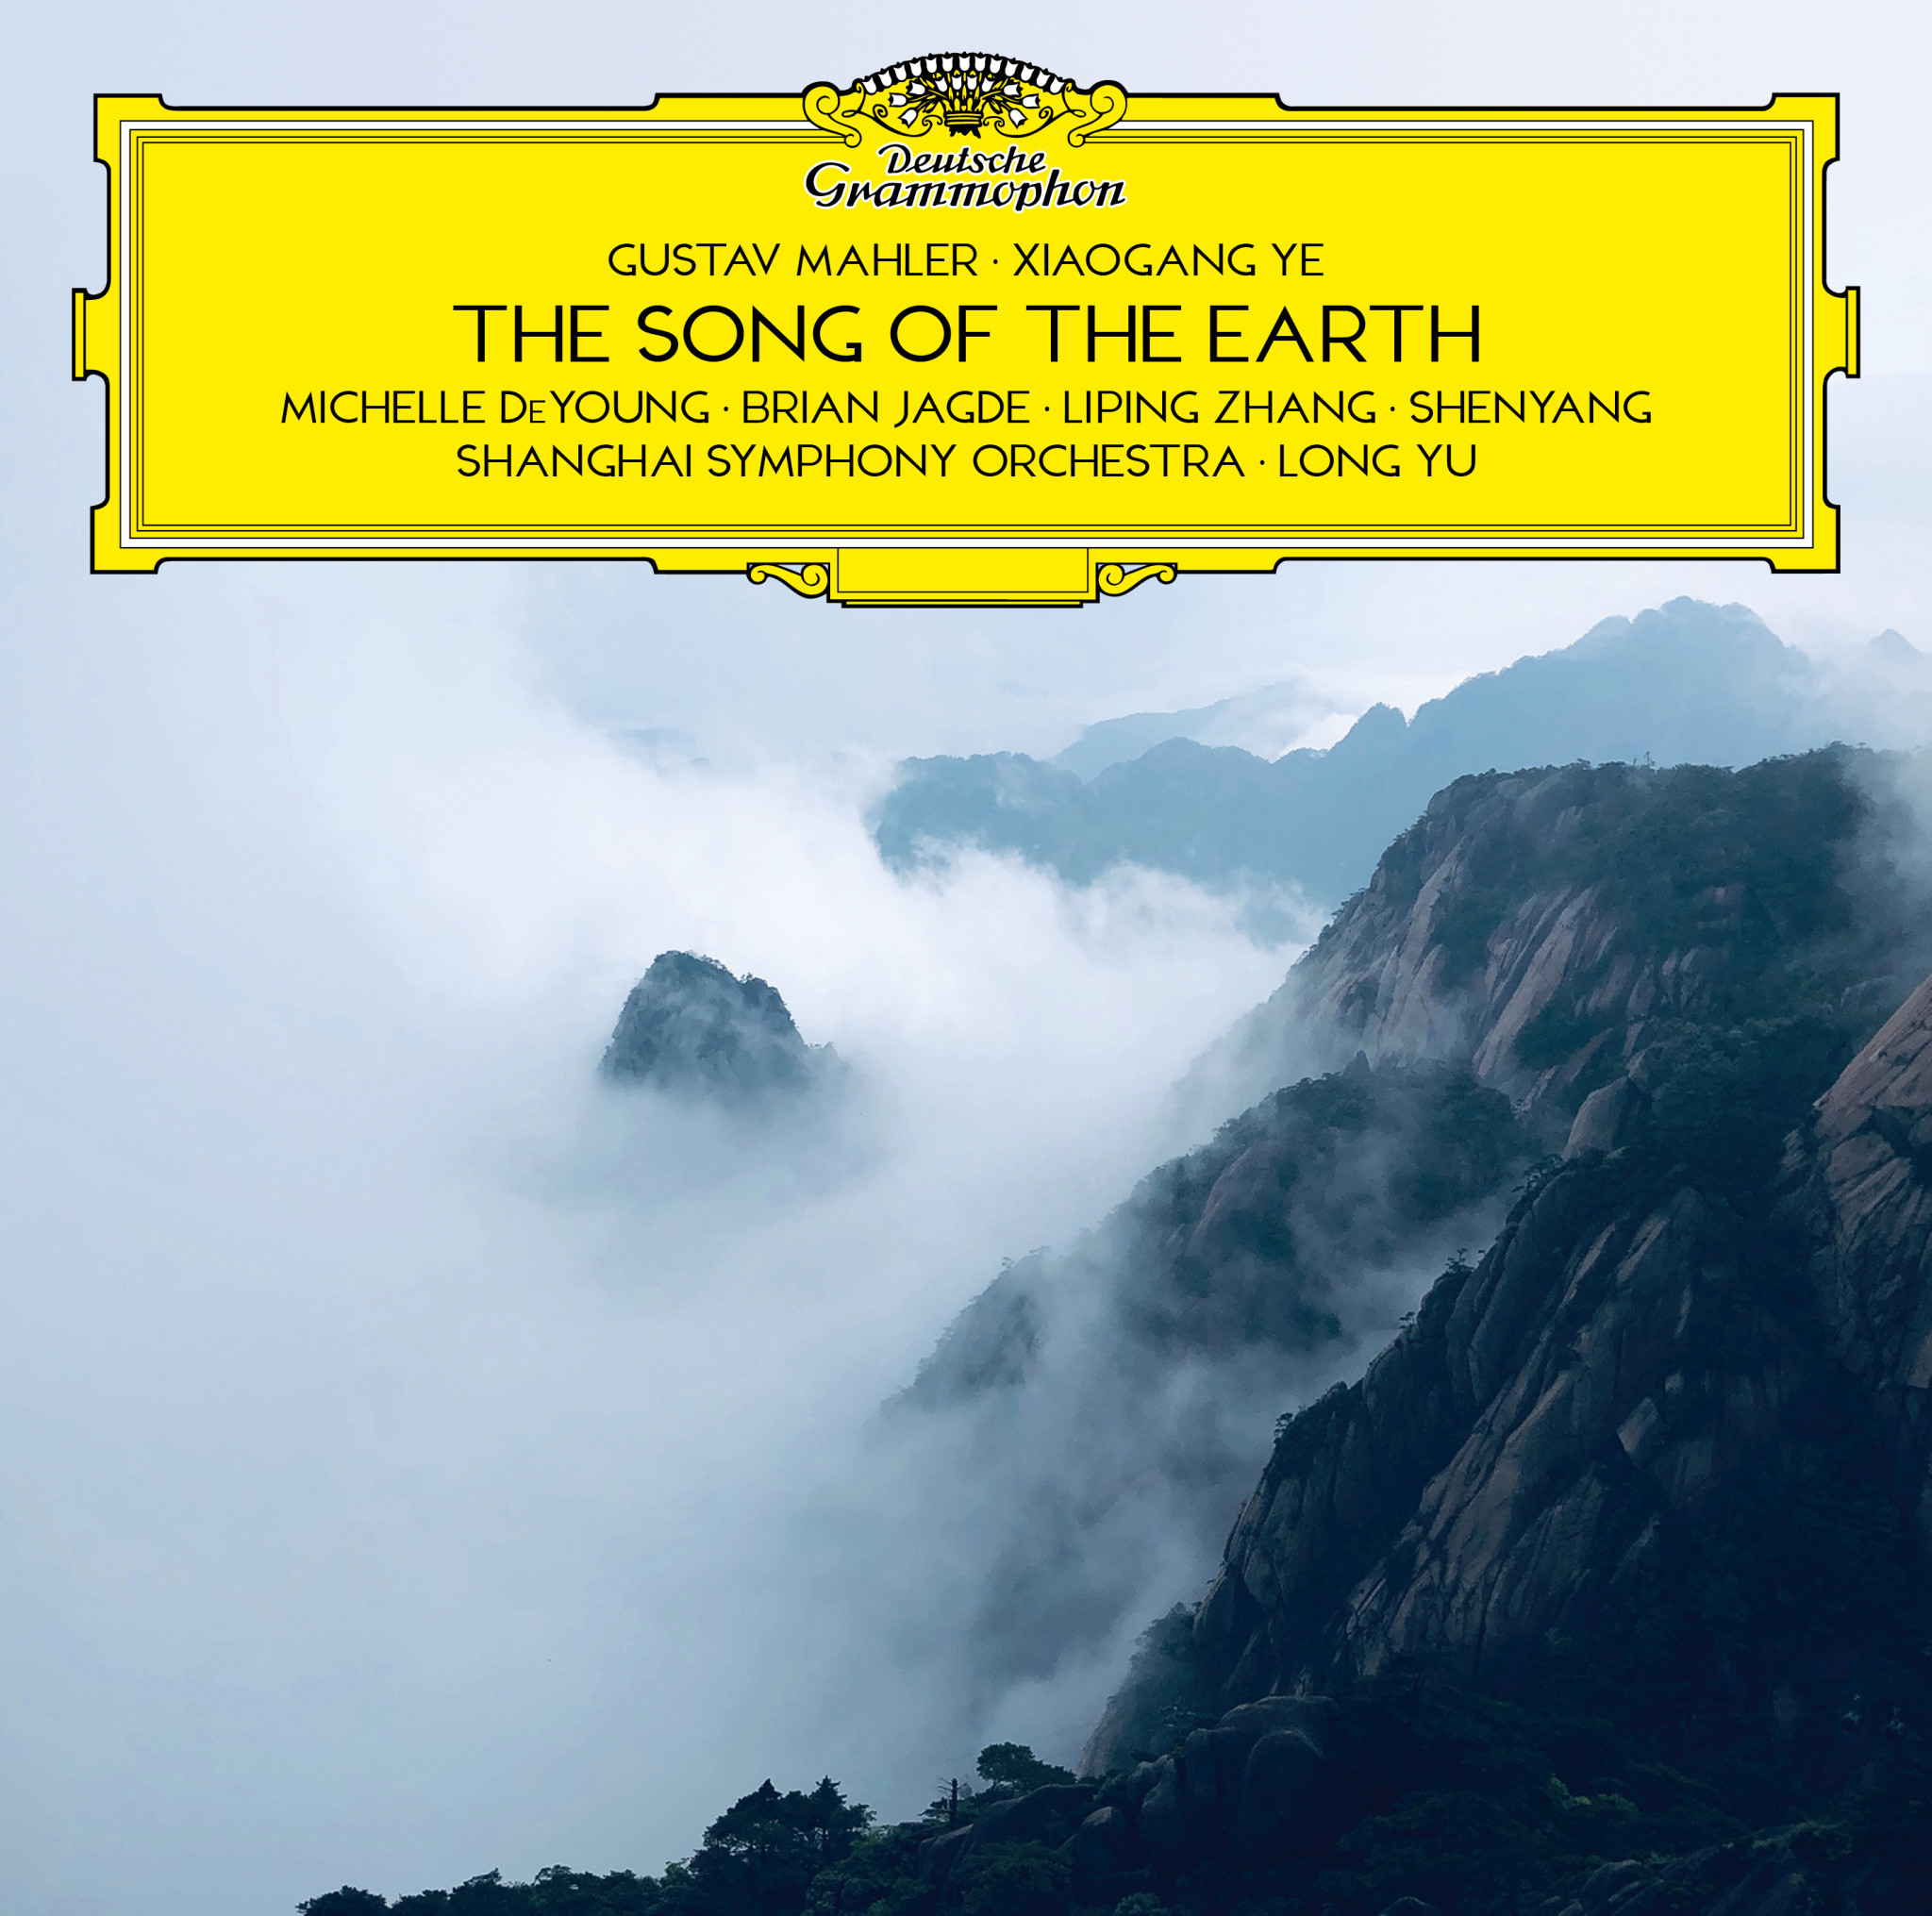 THE SONG OF THE EARTH